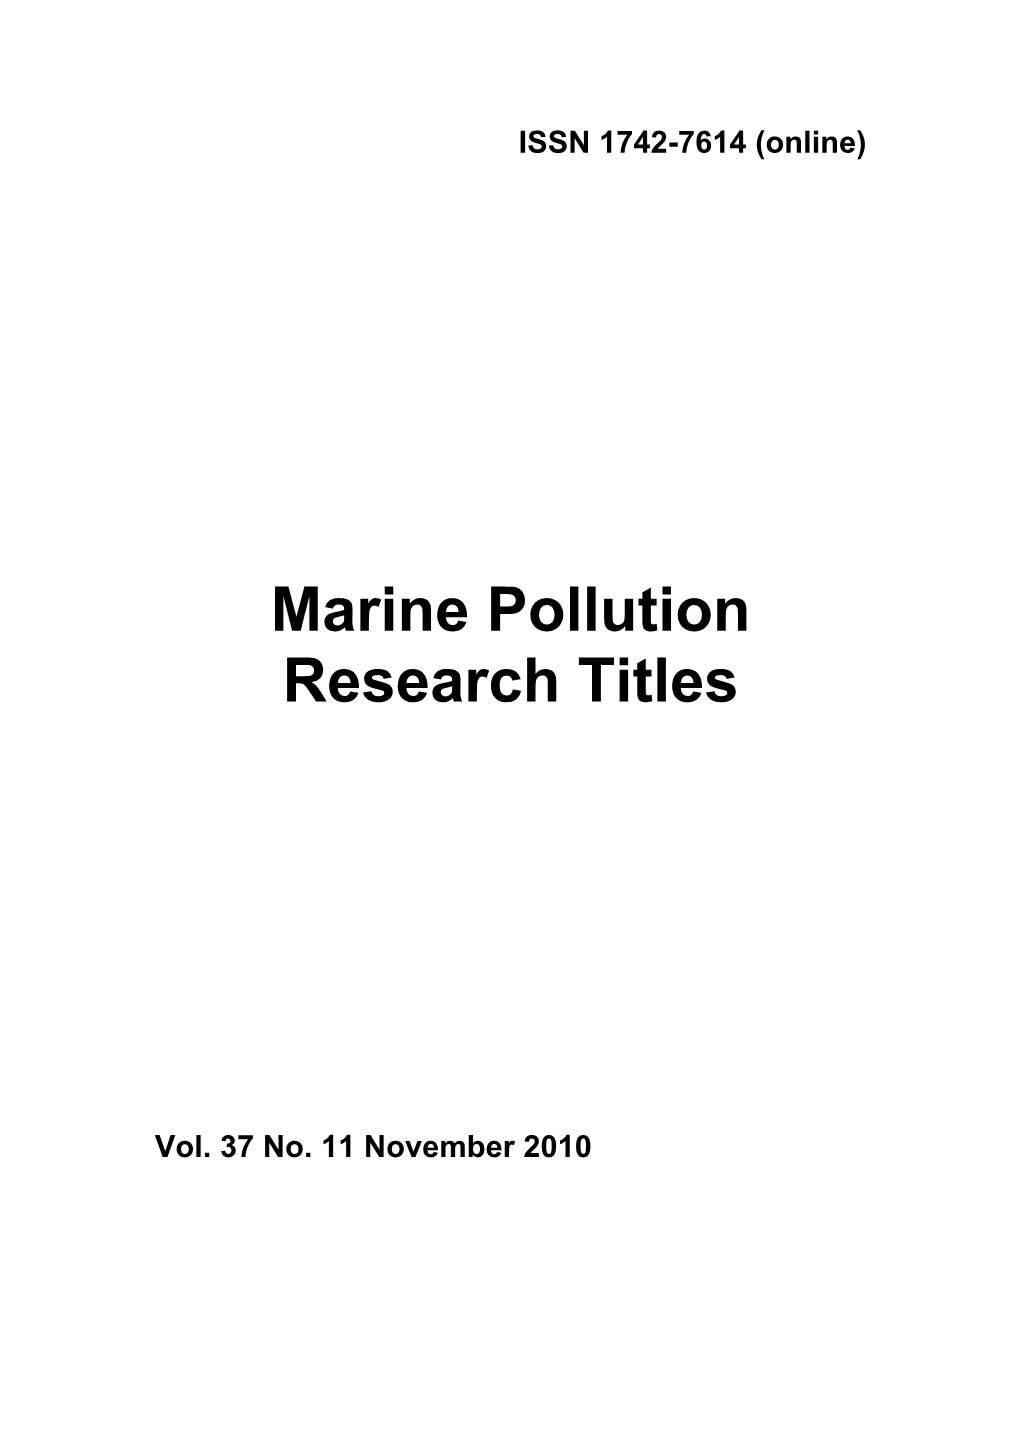 Marine Pollution Research Titles